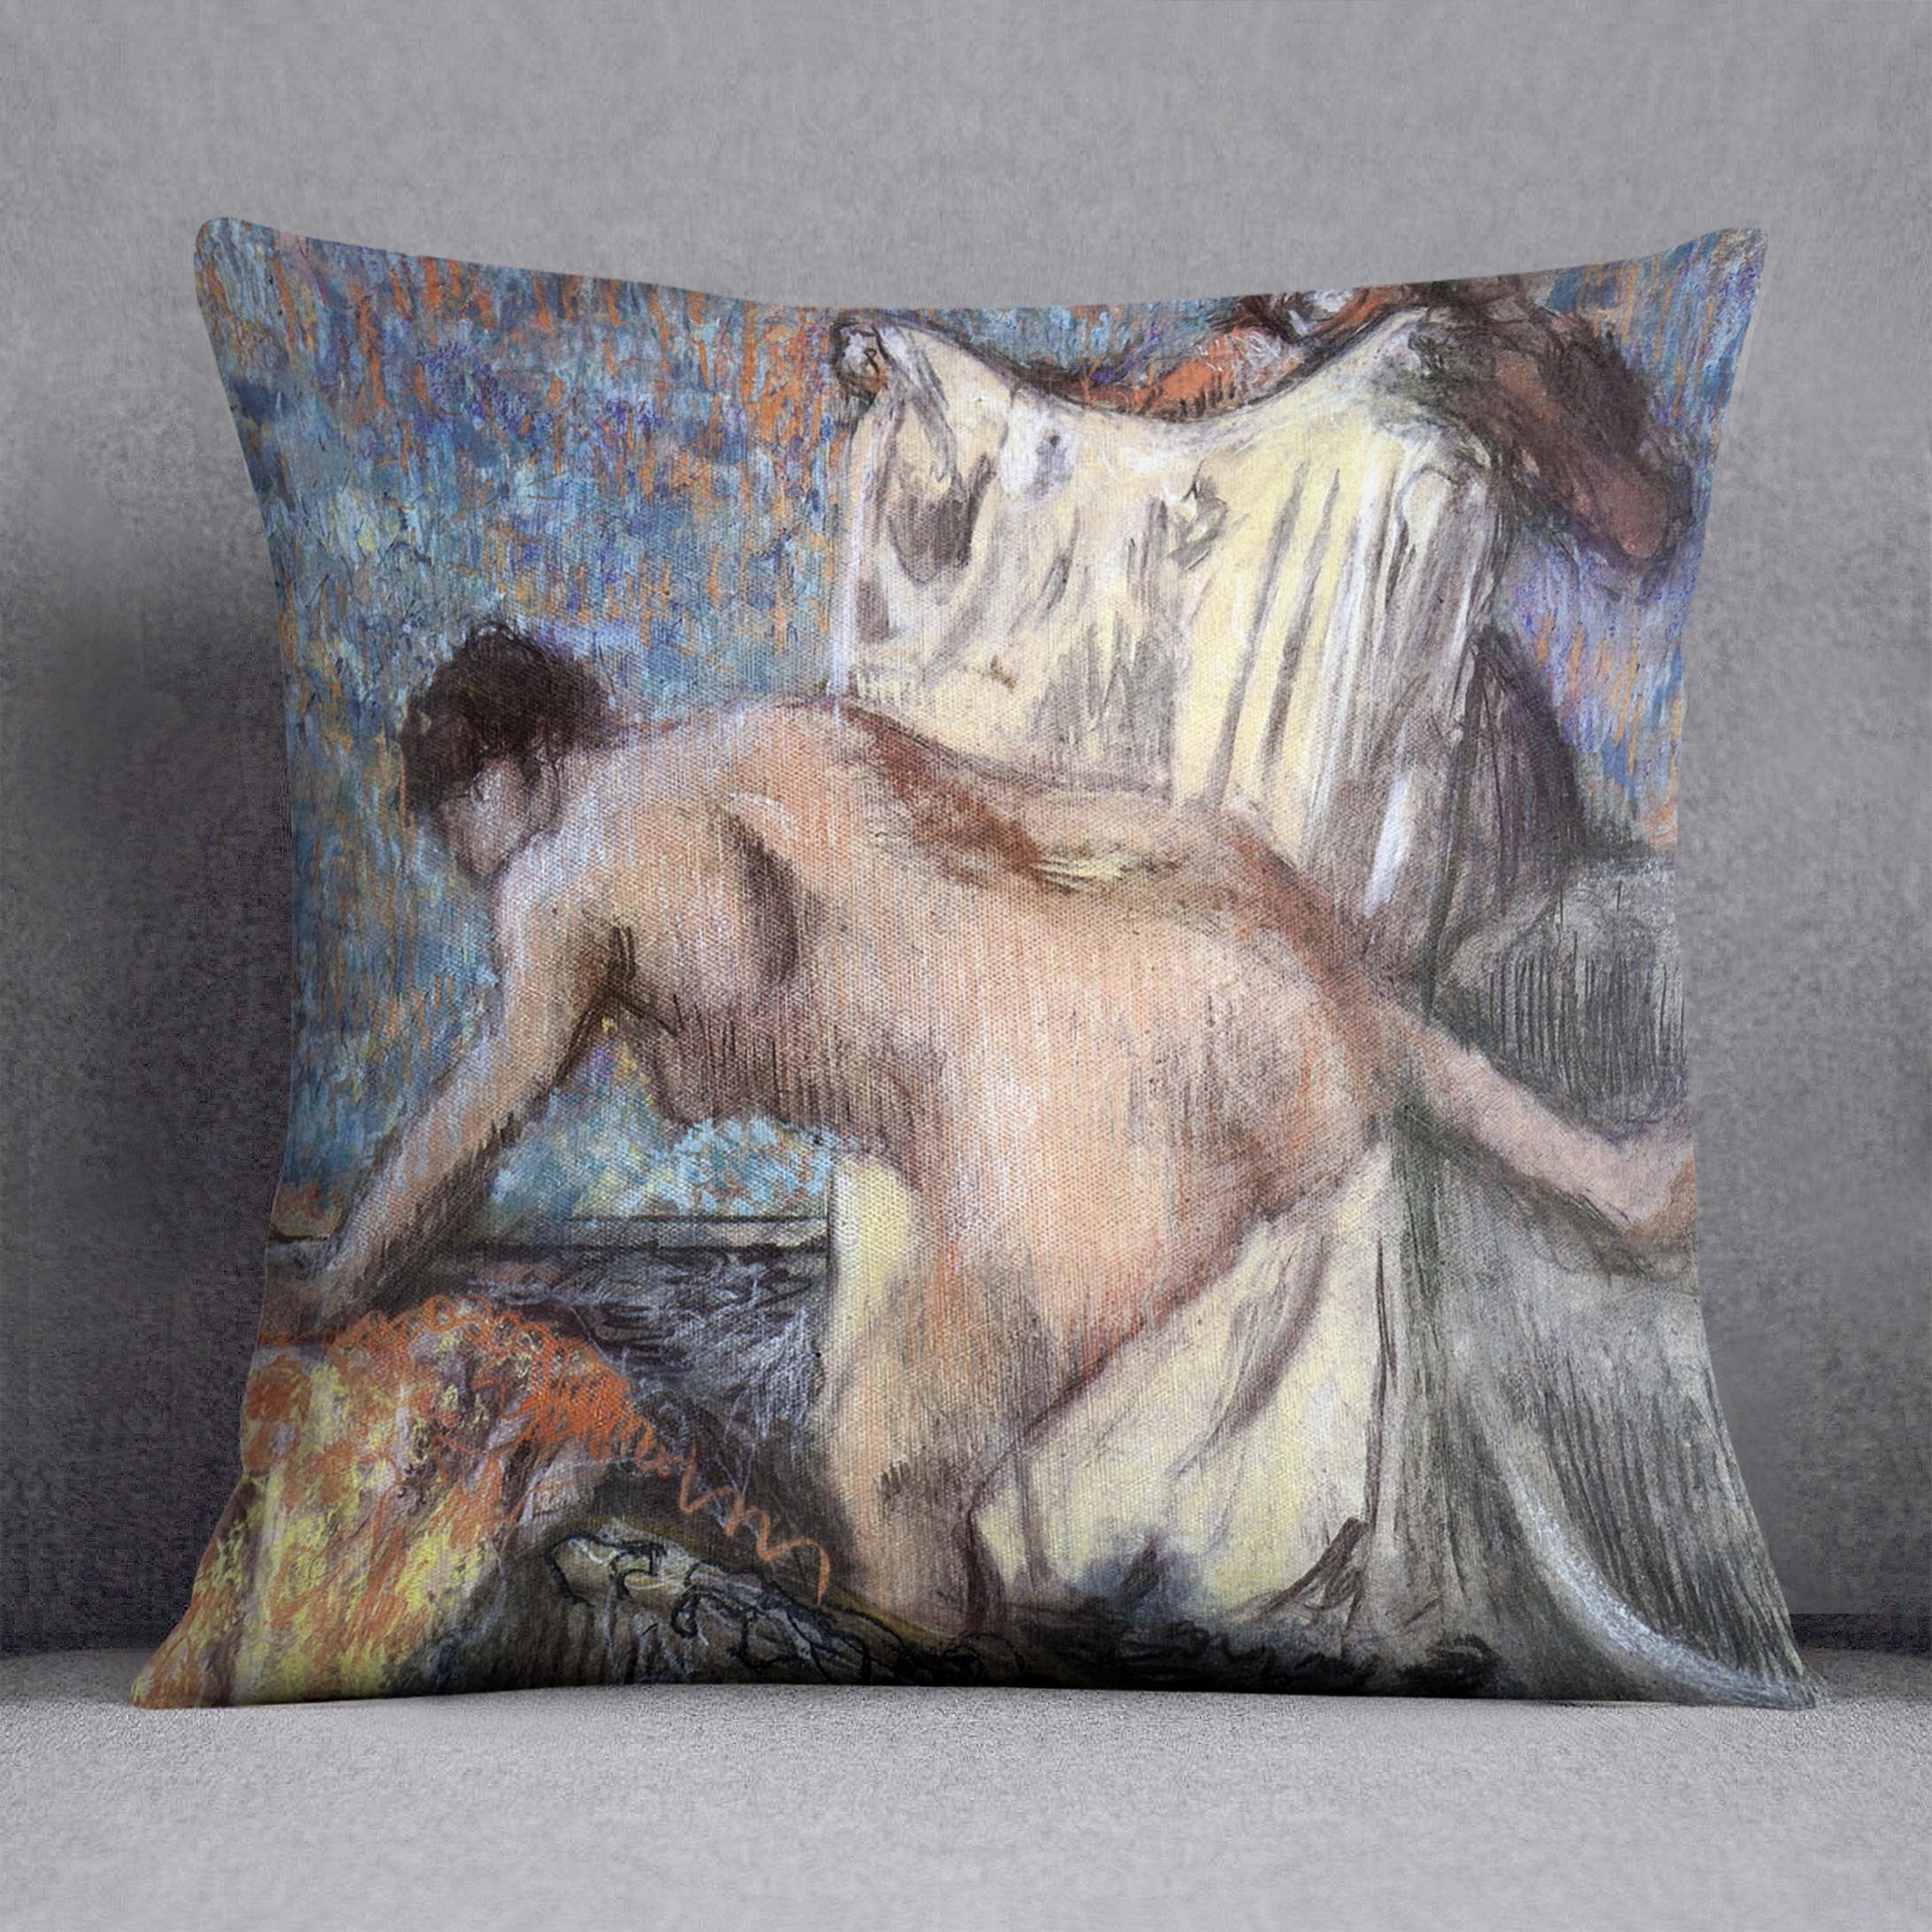 After bathing 3 by Degas Cushion